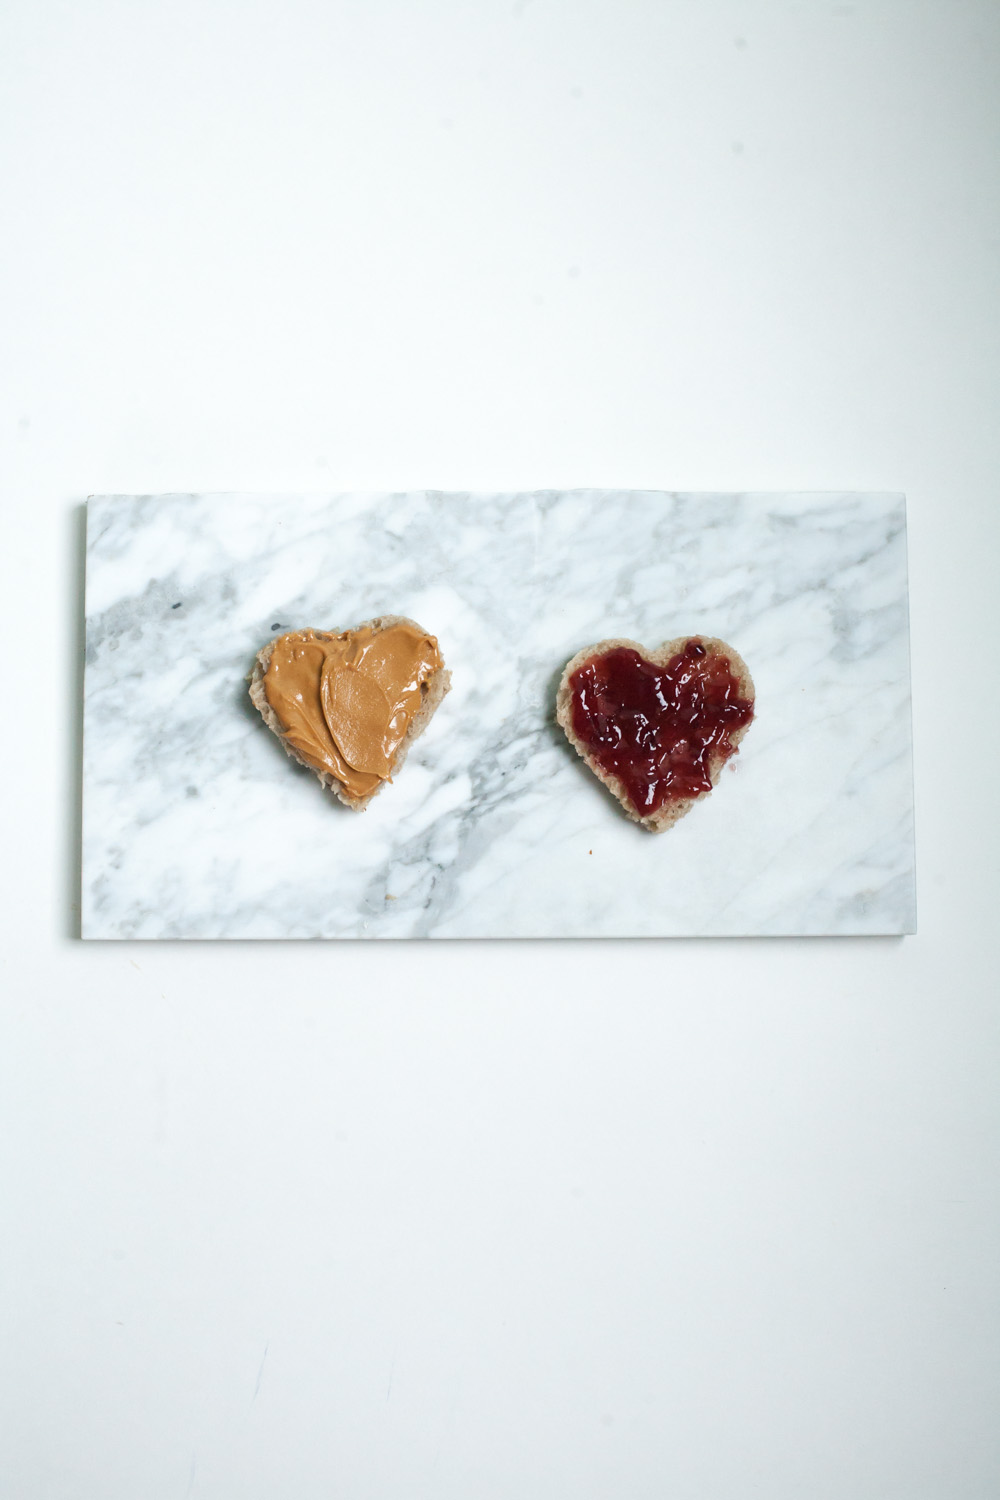 PB + J Valentine food ideas in heart shapes / Go Eat Your Bread with Joy